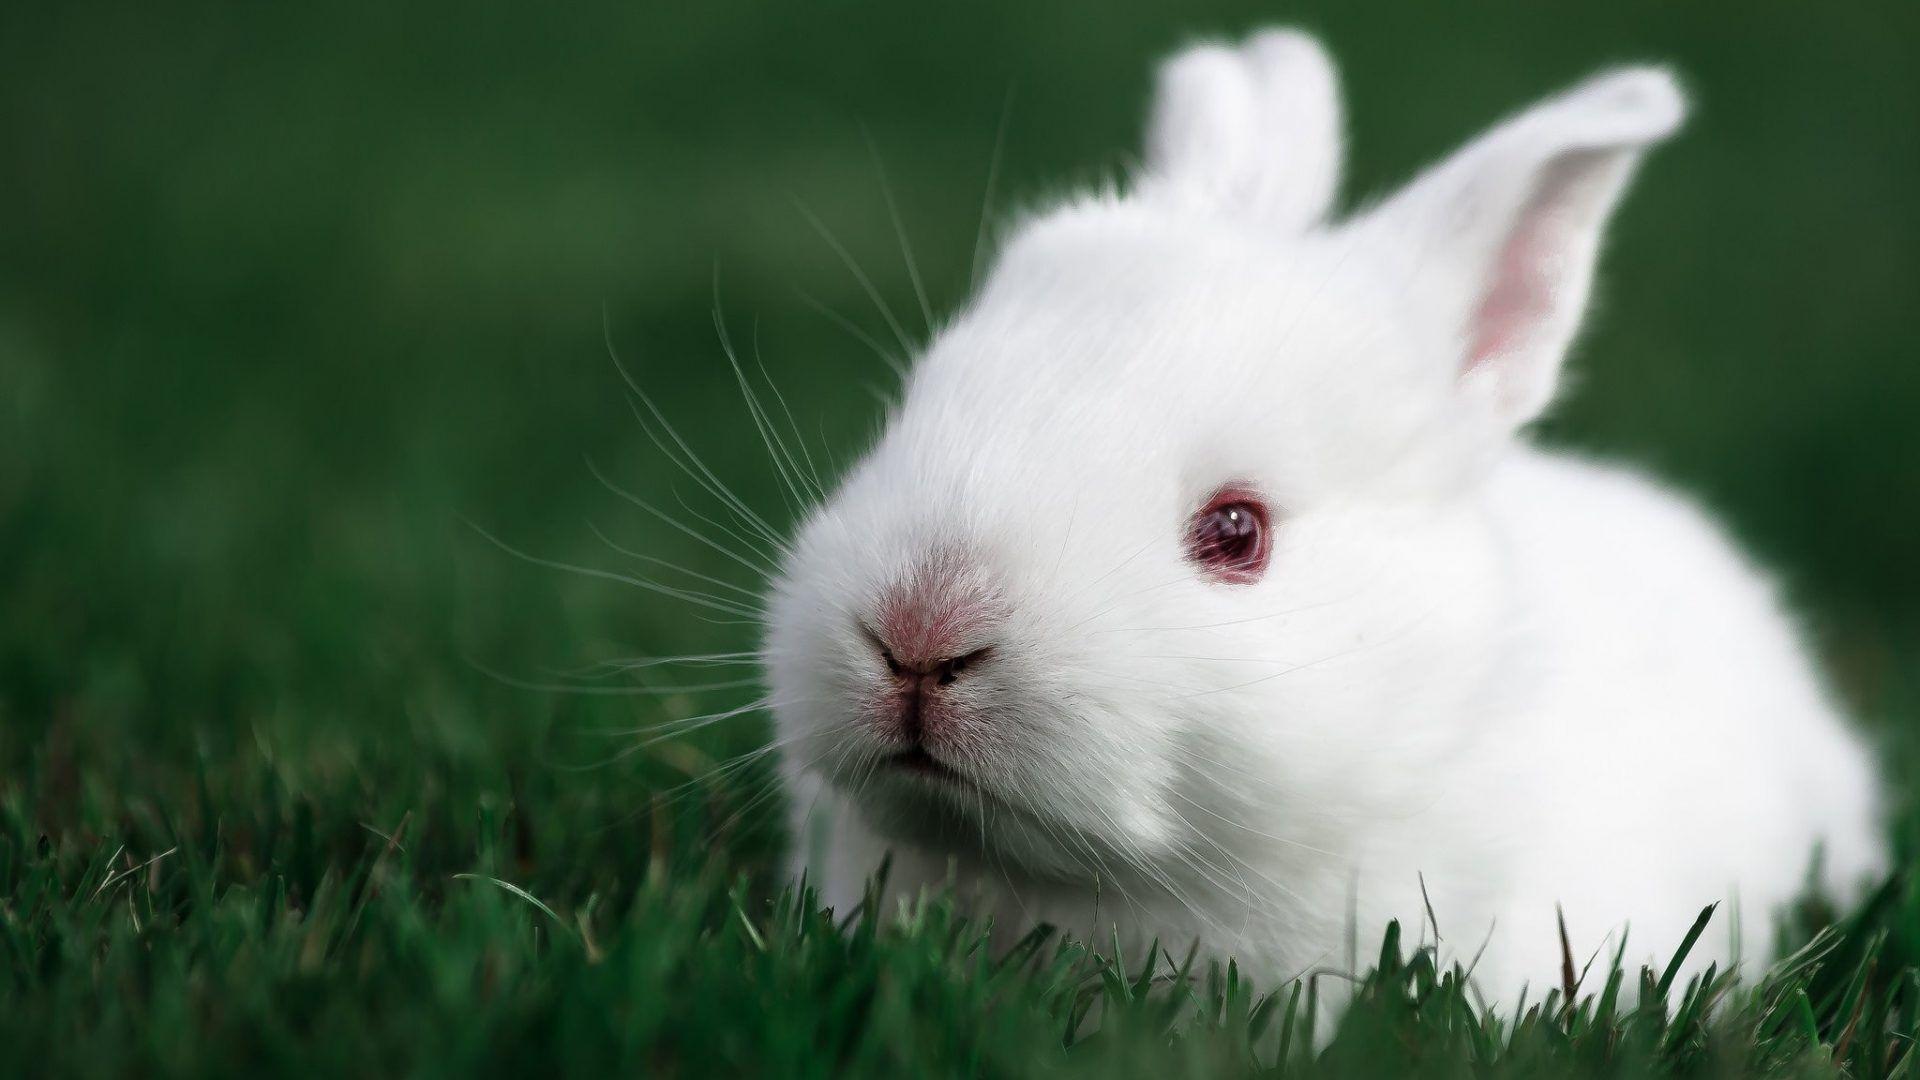 Bunny Tag wallpaper: Baby White Easter Rabbit Bunny Image Of